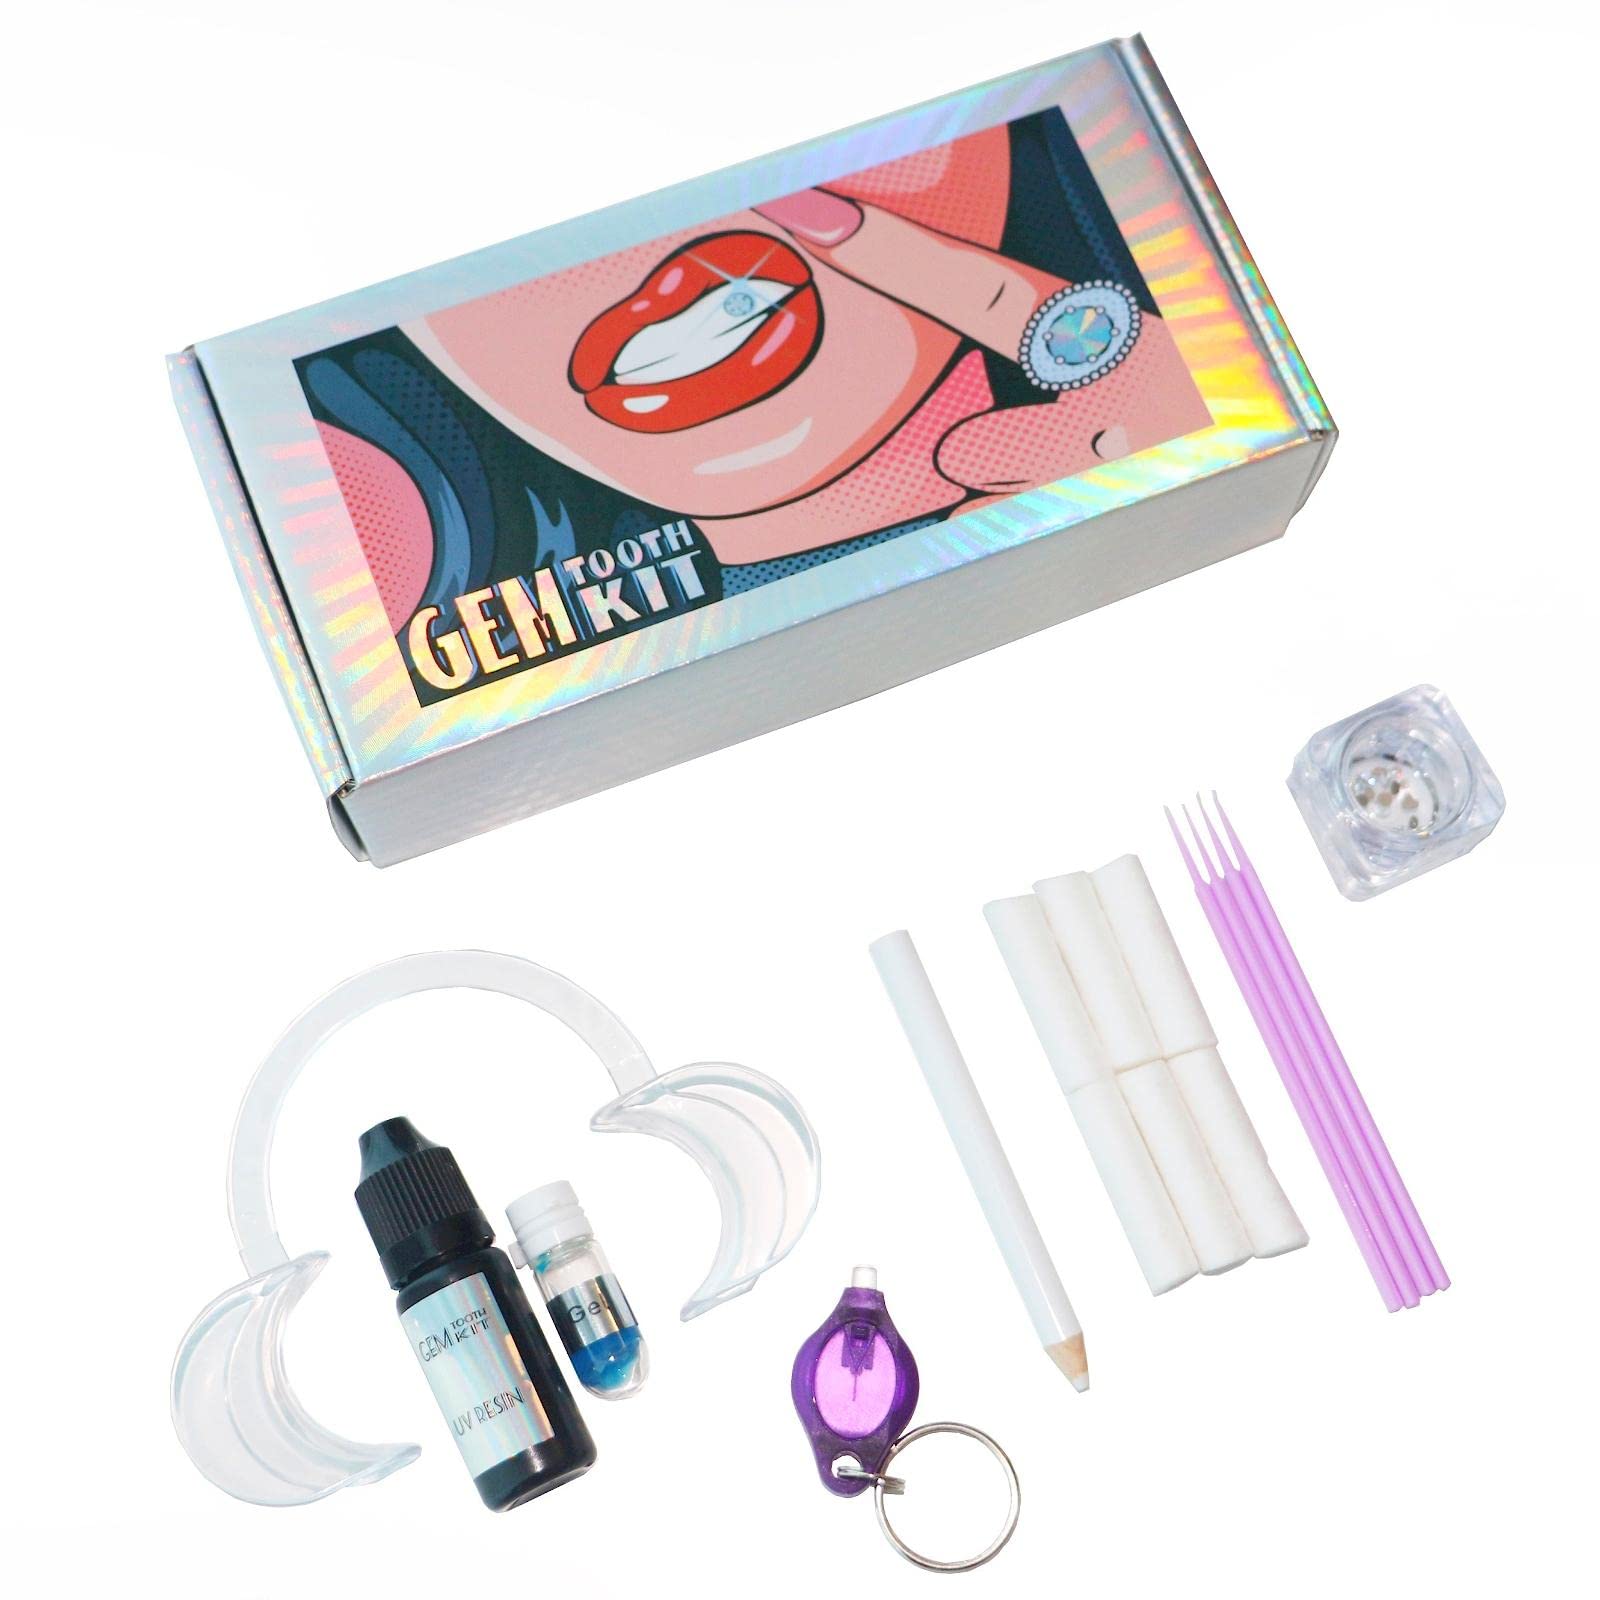 Tooth Jewelry Set,diy Teeth Gems Kit With Curing Light And Glue